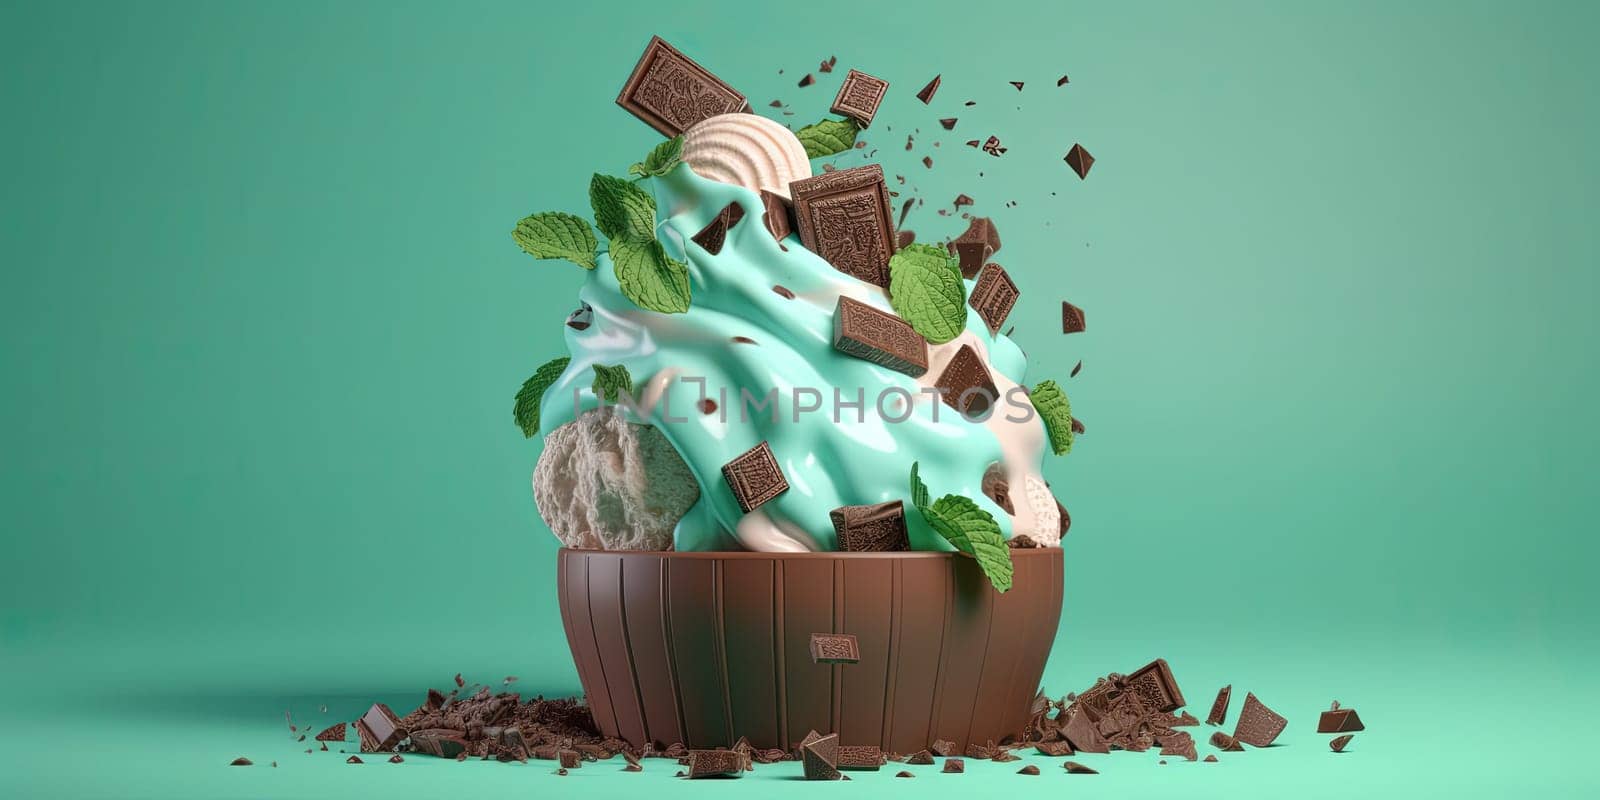 Illustration Of Ice Cream Dessert With The Pistachio And Chocolate On A Mint Background by tan4ikk1